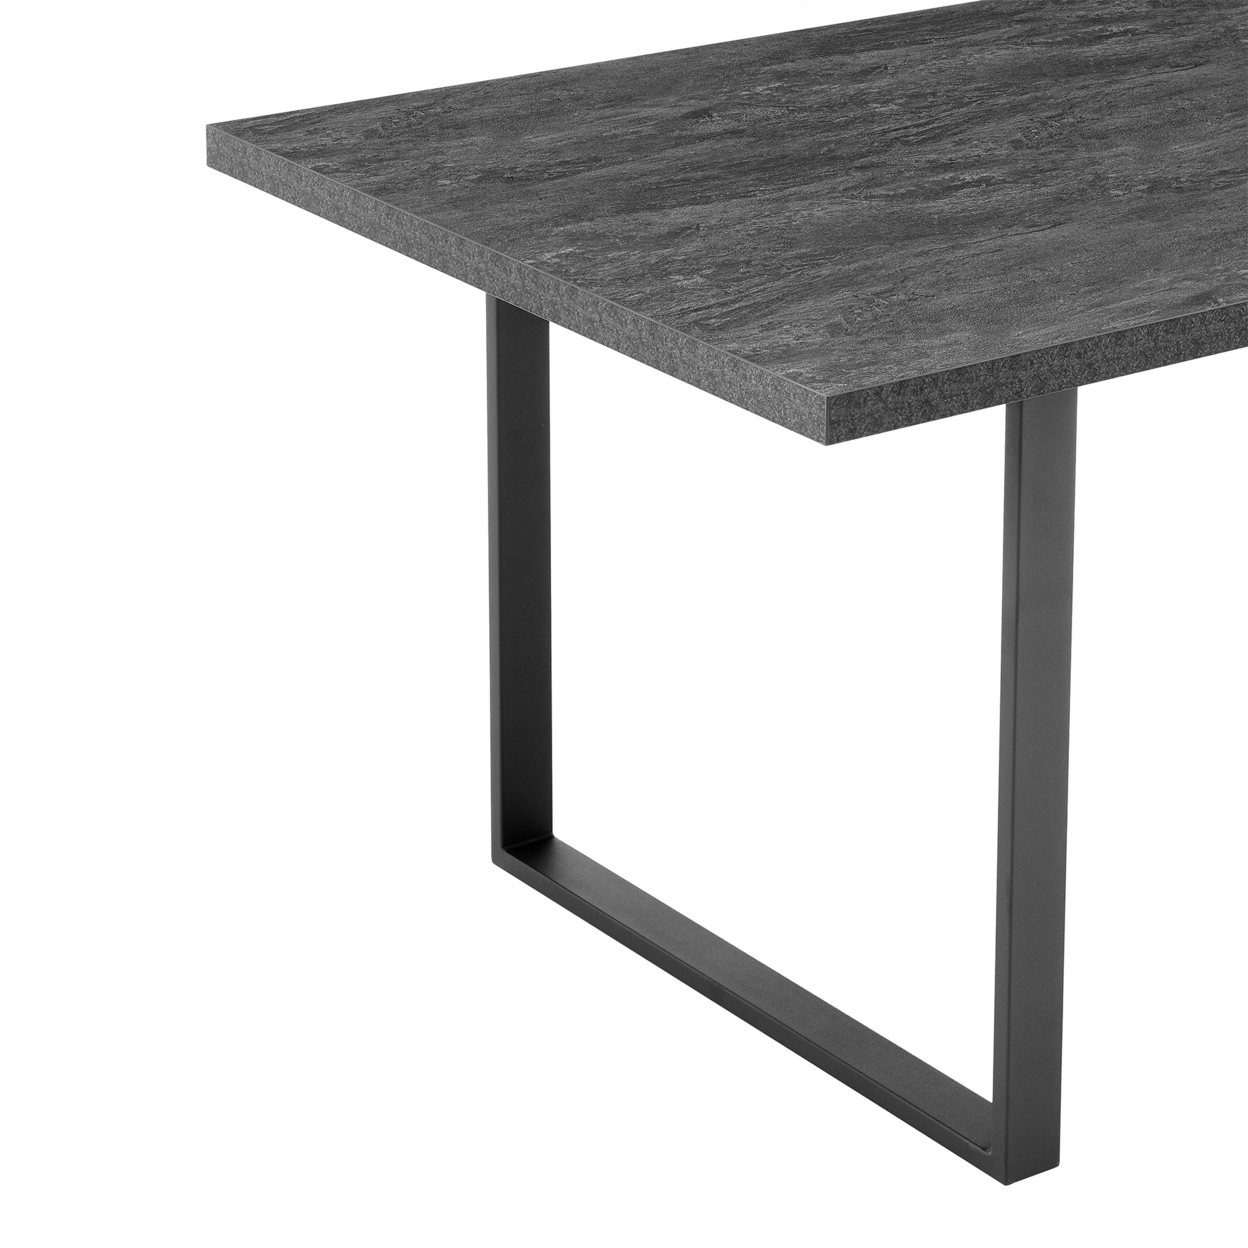 Dining Table With Wooden Top And Metal Sled Base, Gray And Black- Saltoro Sherpi